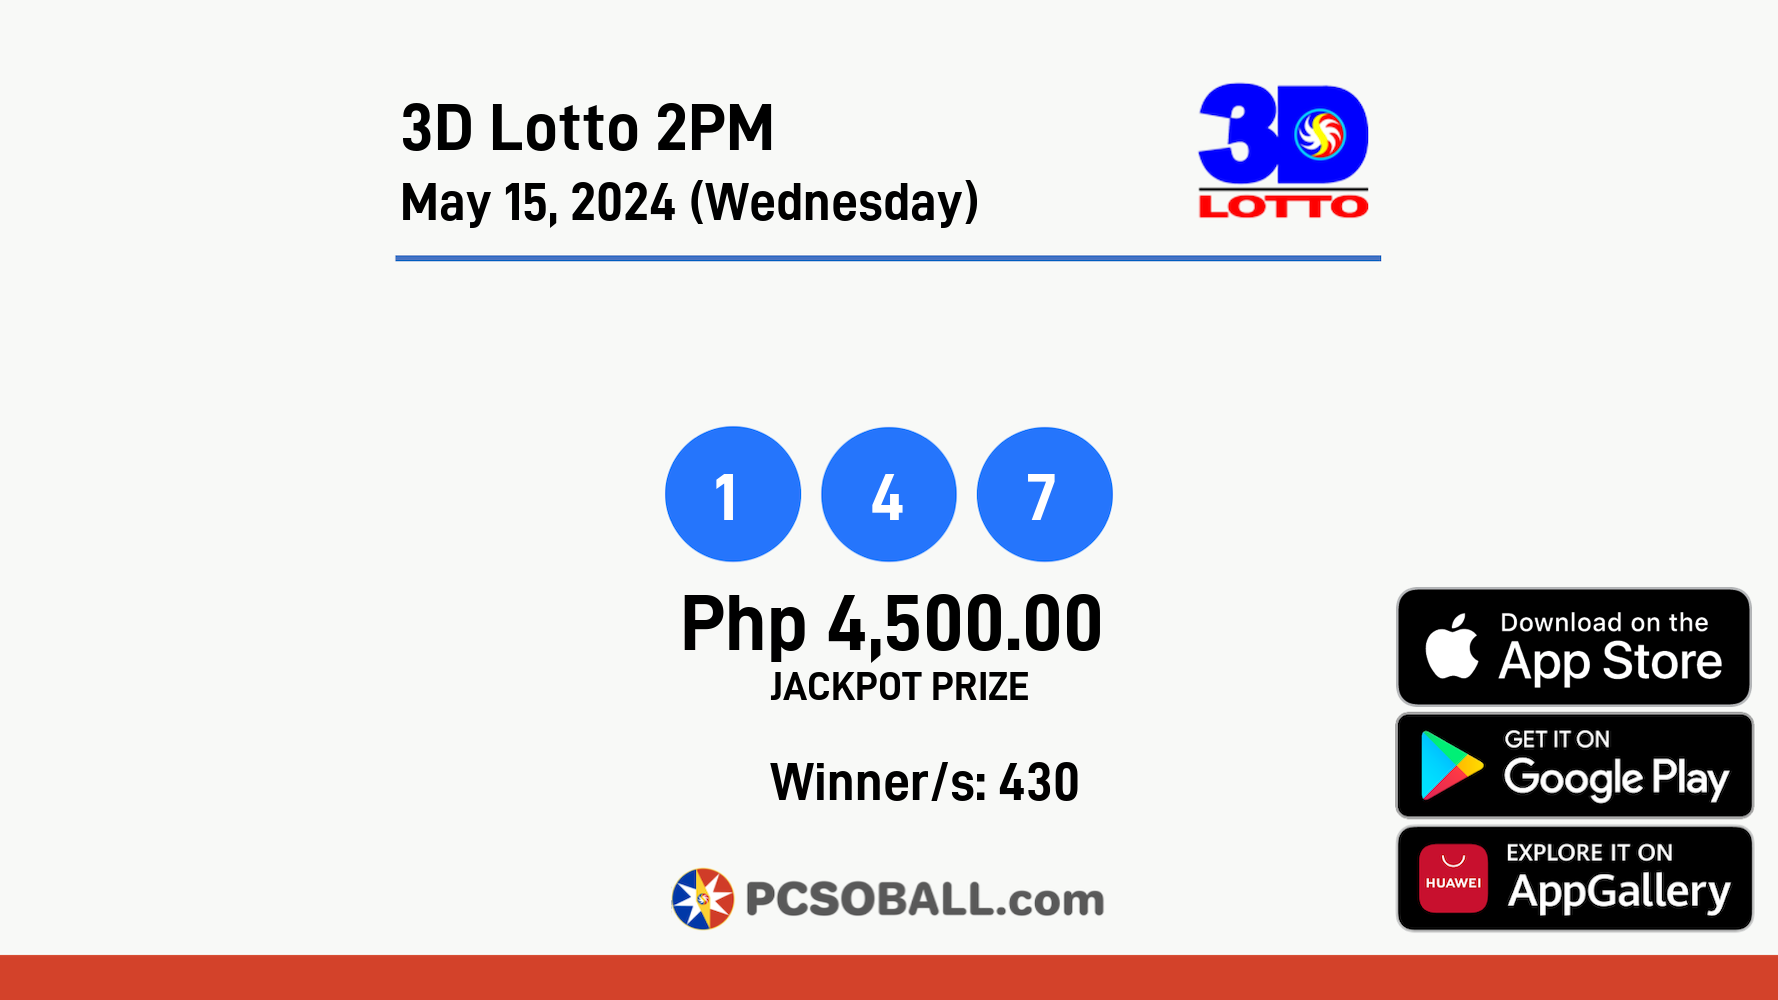 3D Lotto 2PM May 15, 2024 (Wednesday) Result